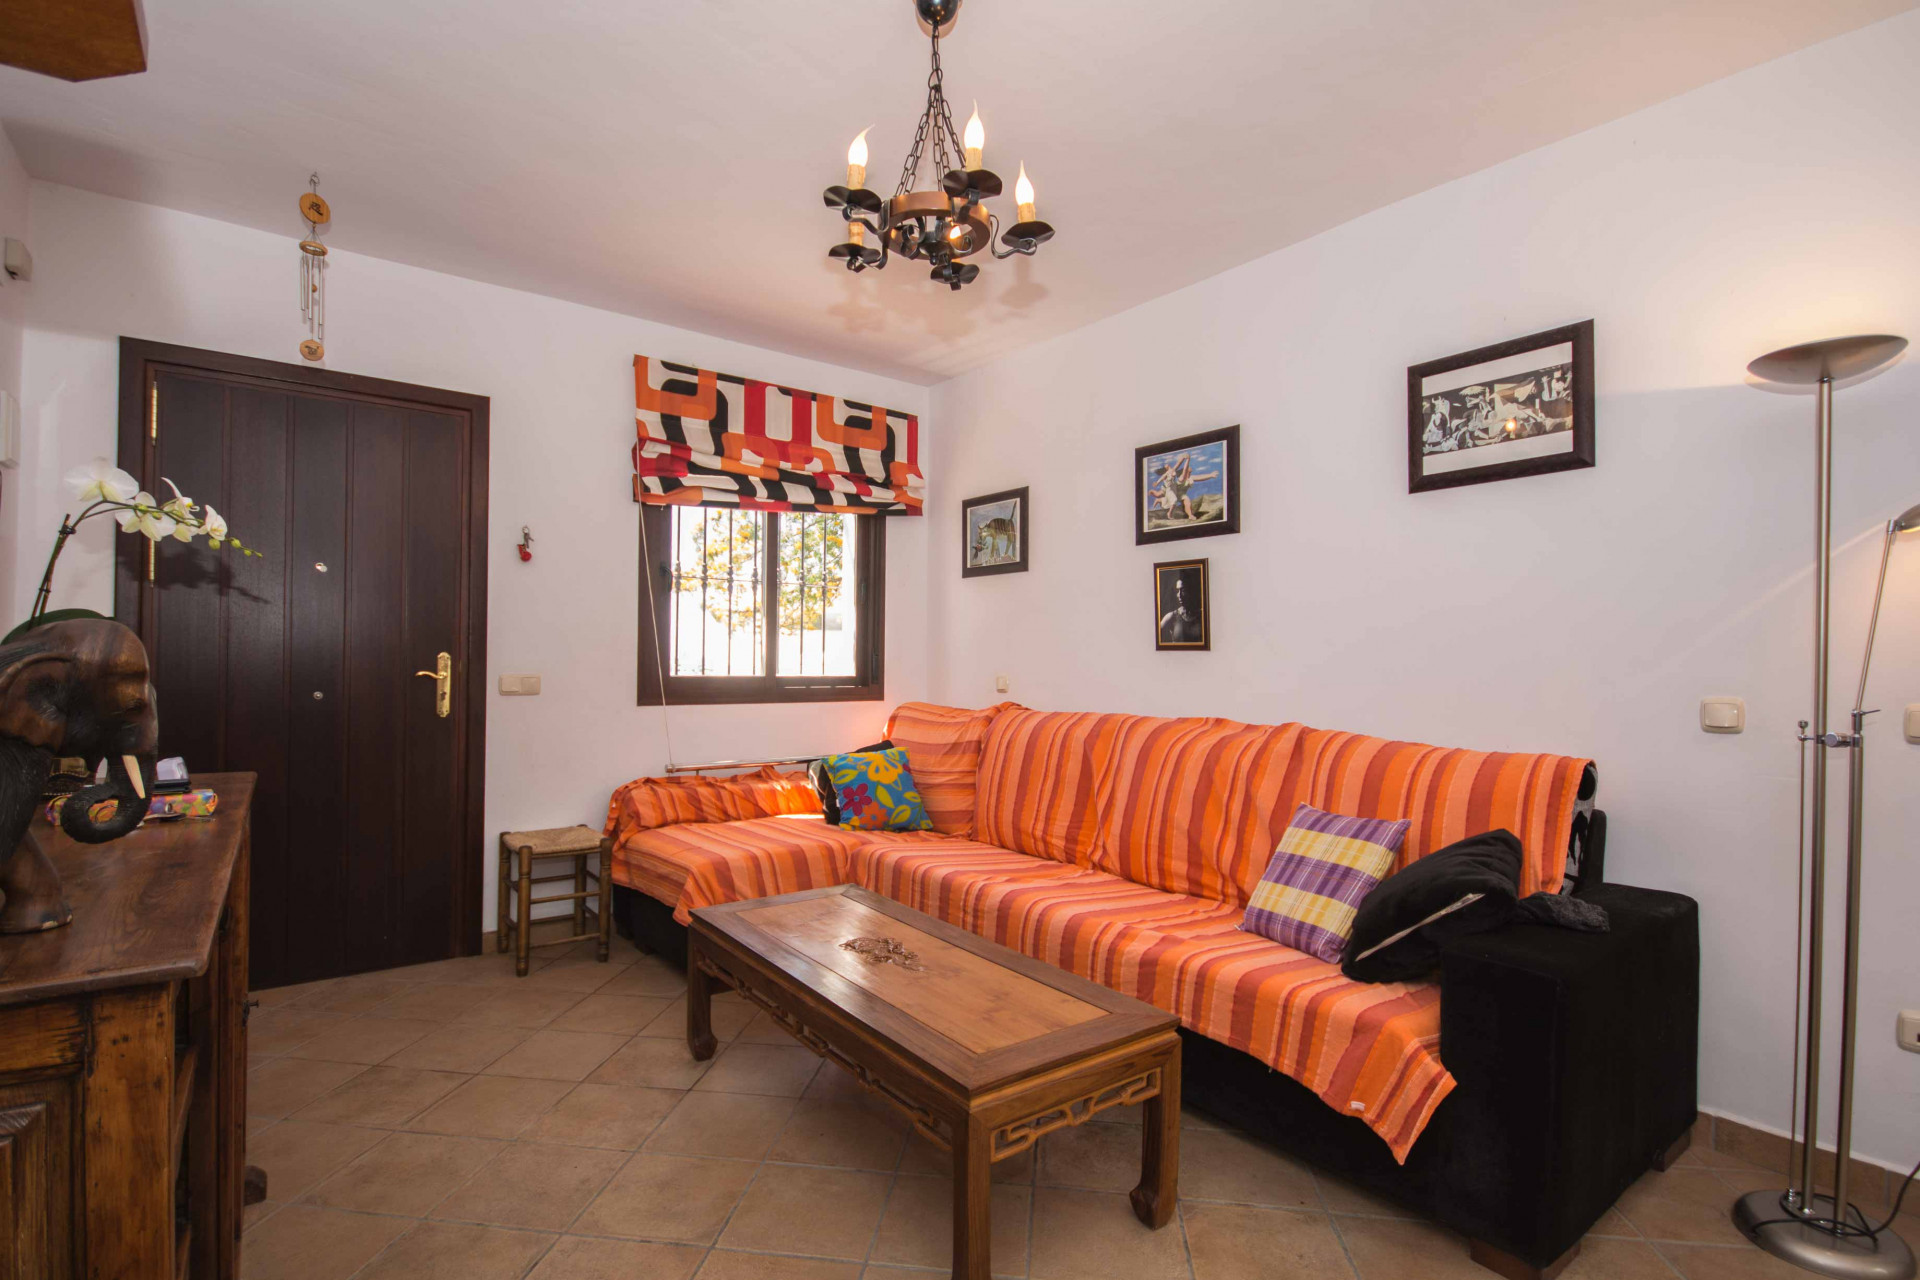 Semi-detached house for sale in the center of Marbella